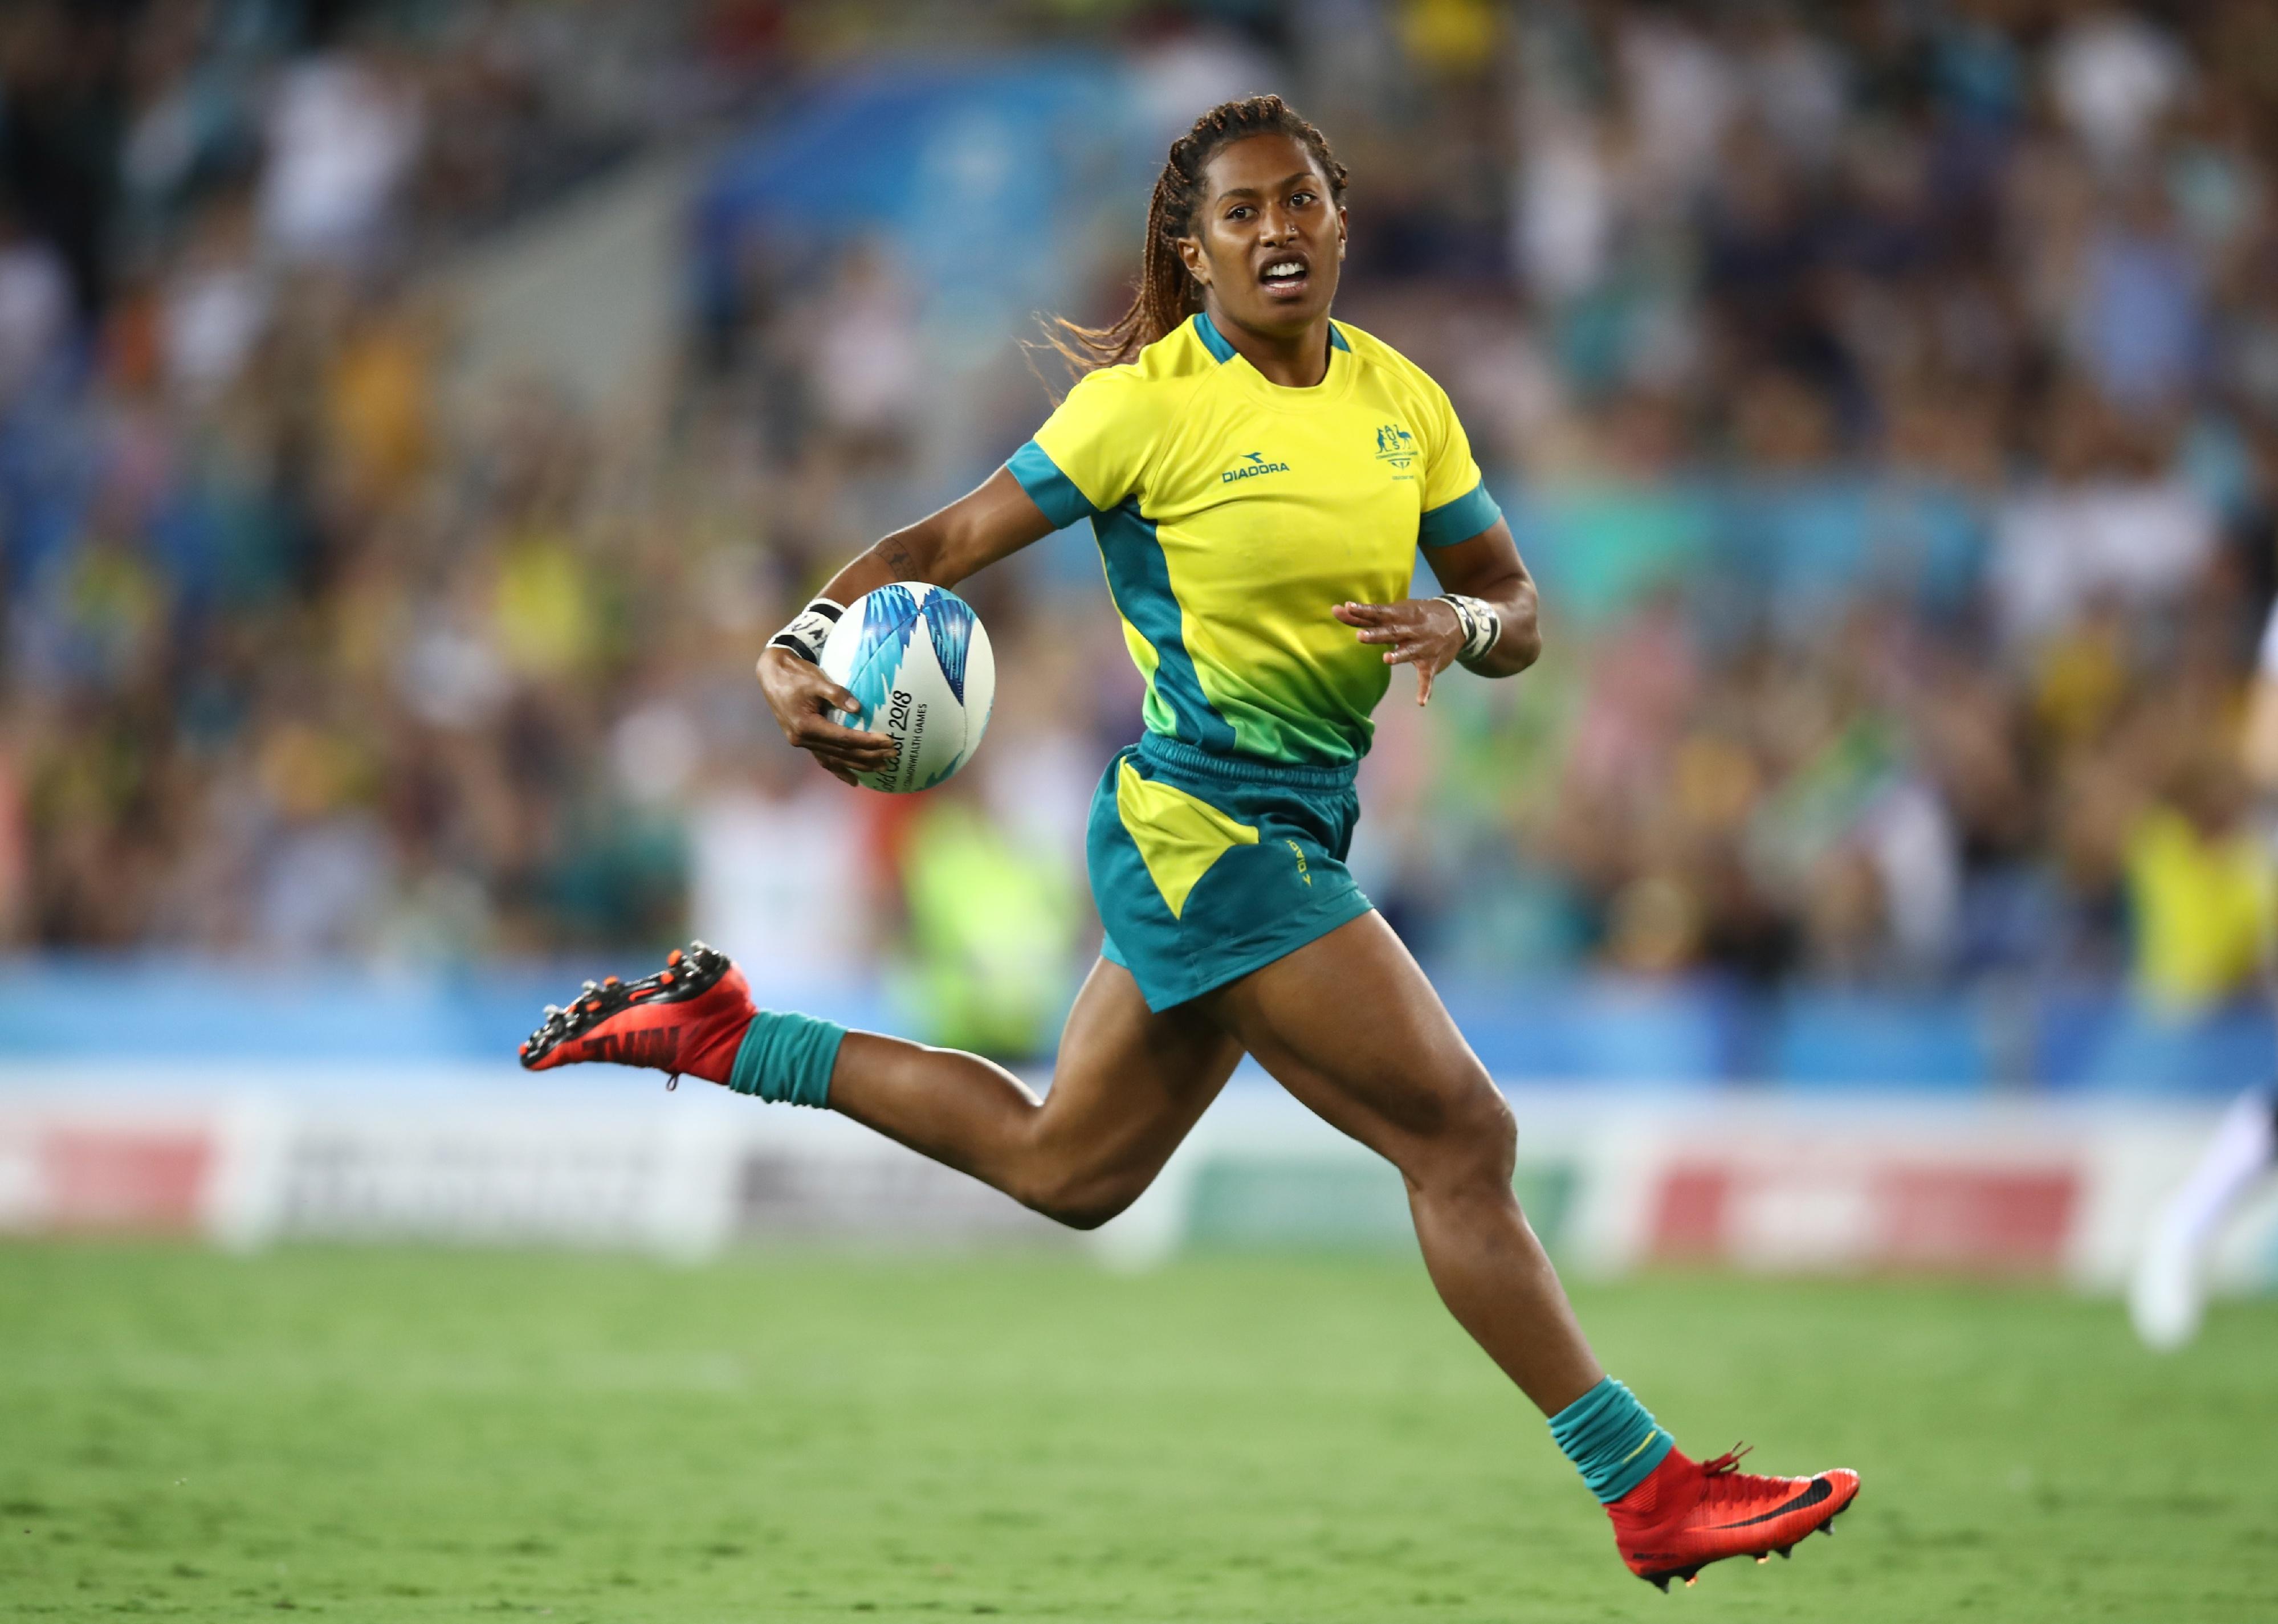 Ellia Green of Australia runs in for a try in a match.